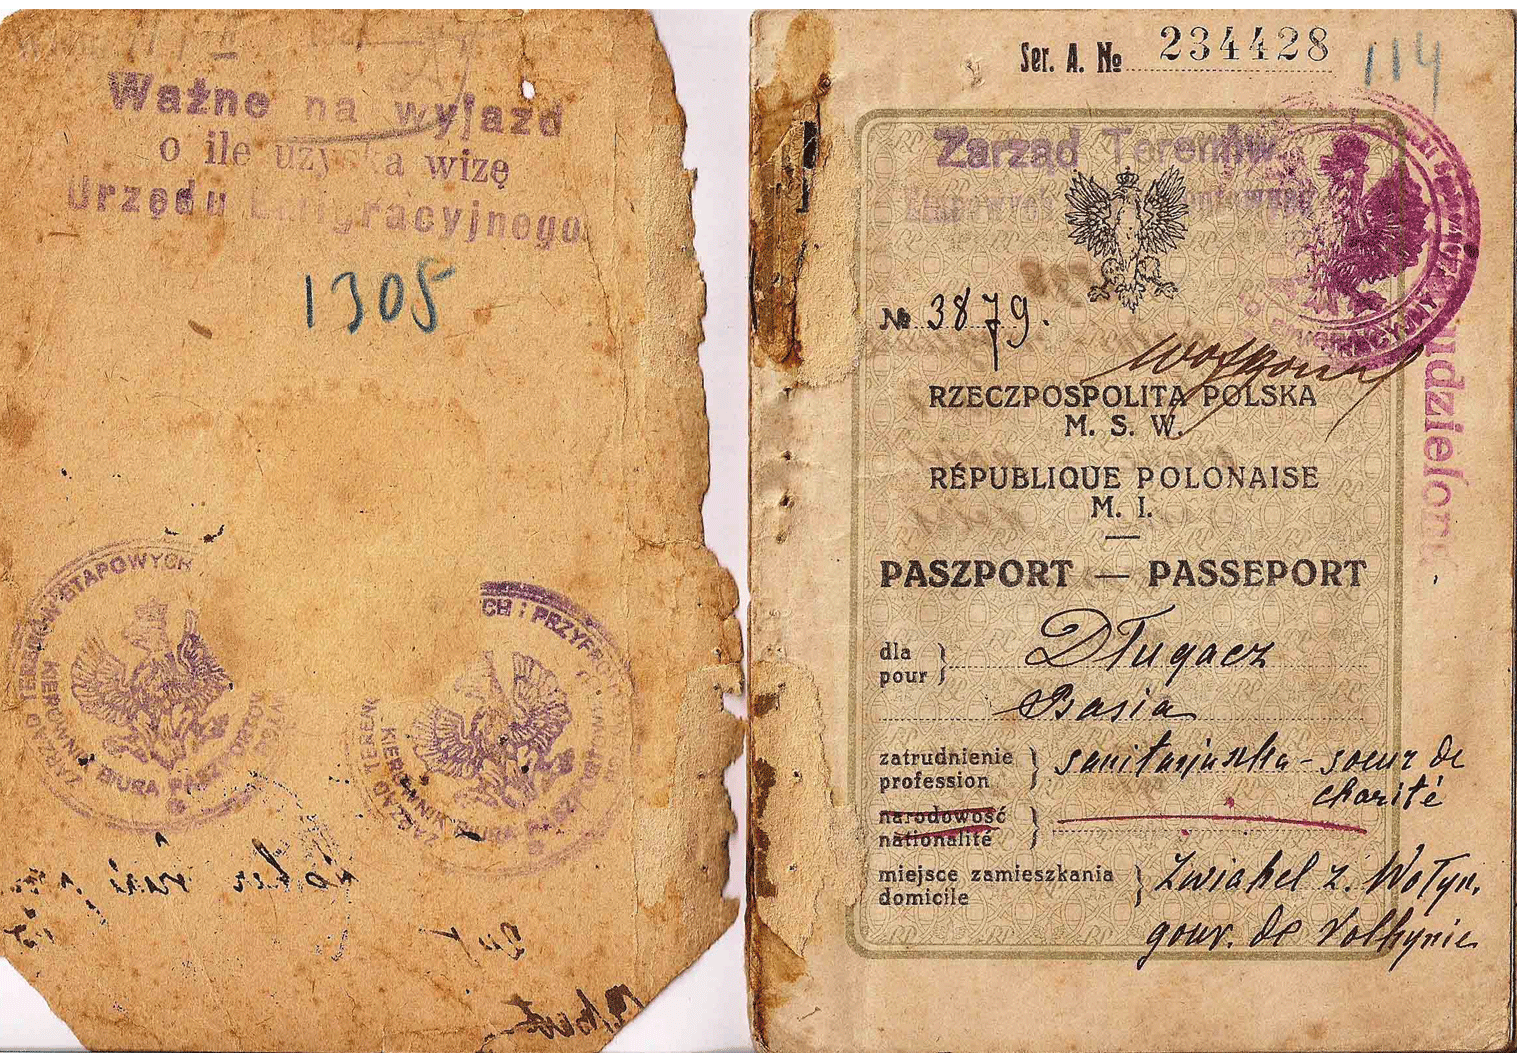 post-WWI passport issued in liberated former Russian territory.